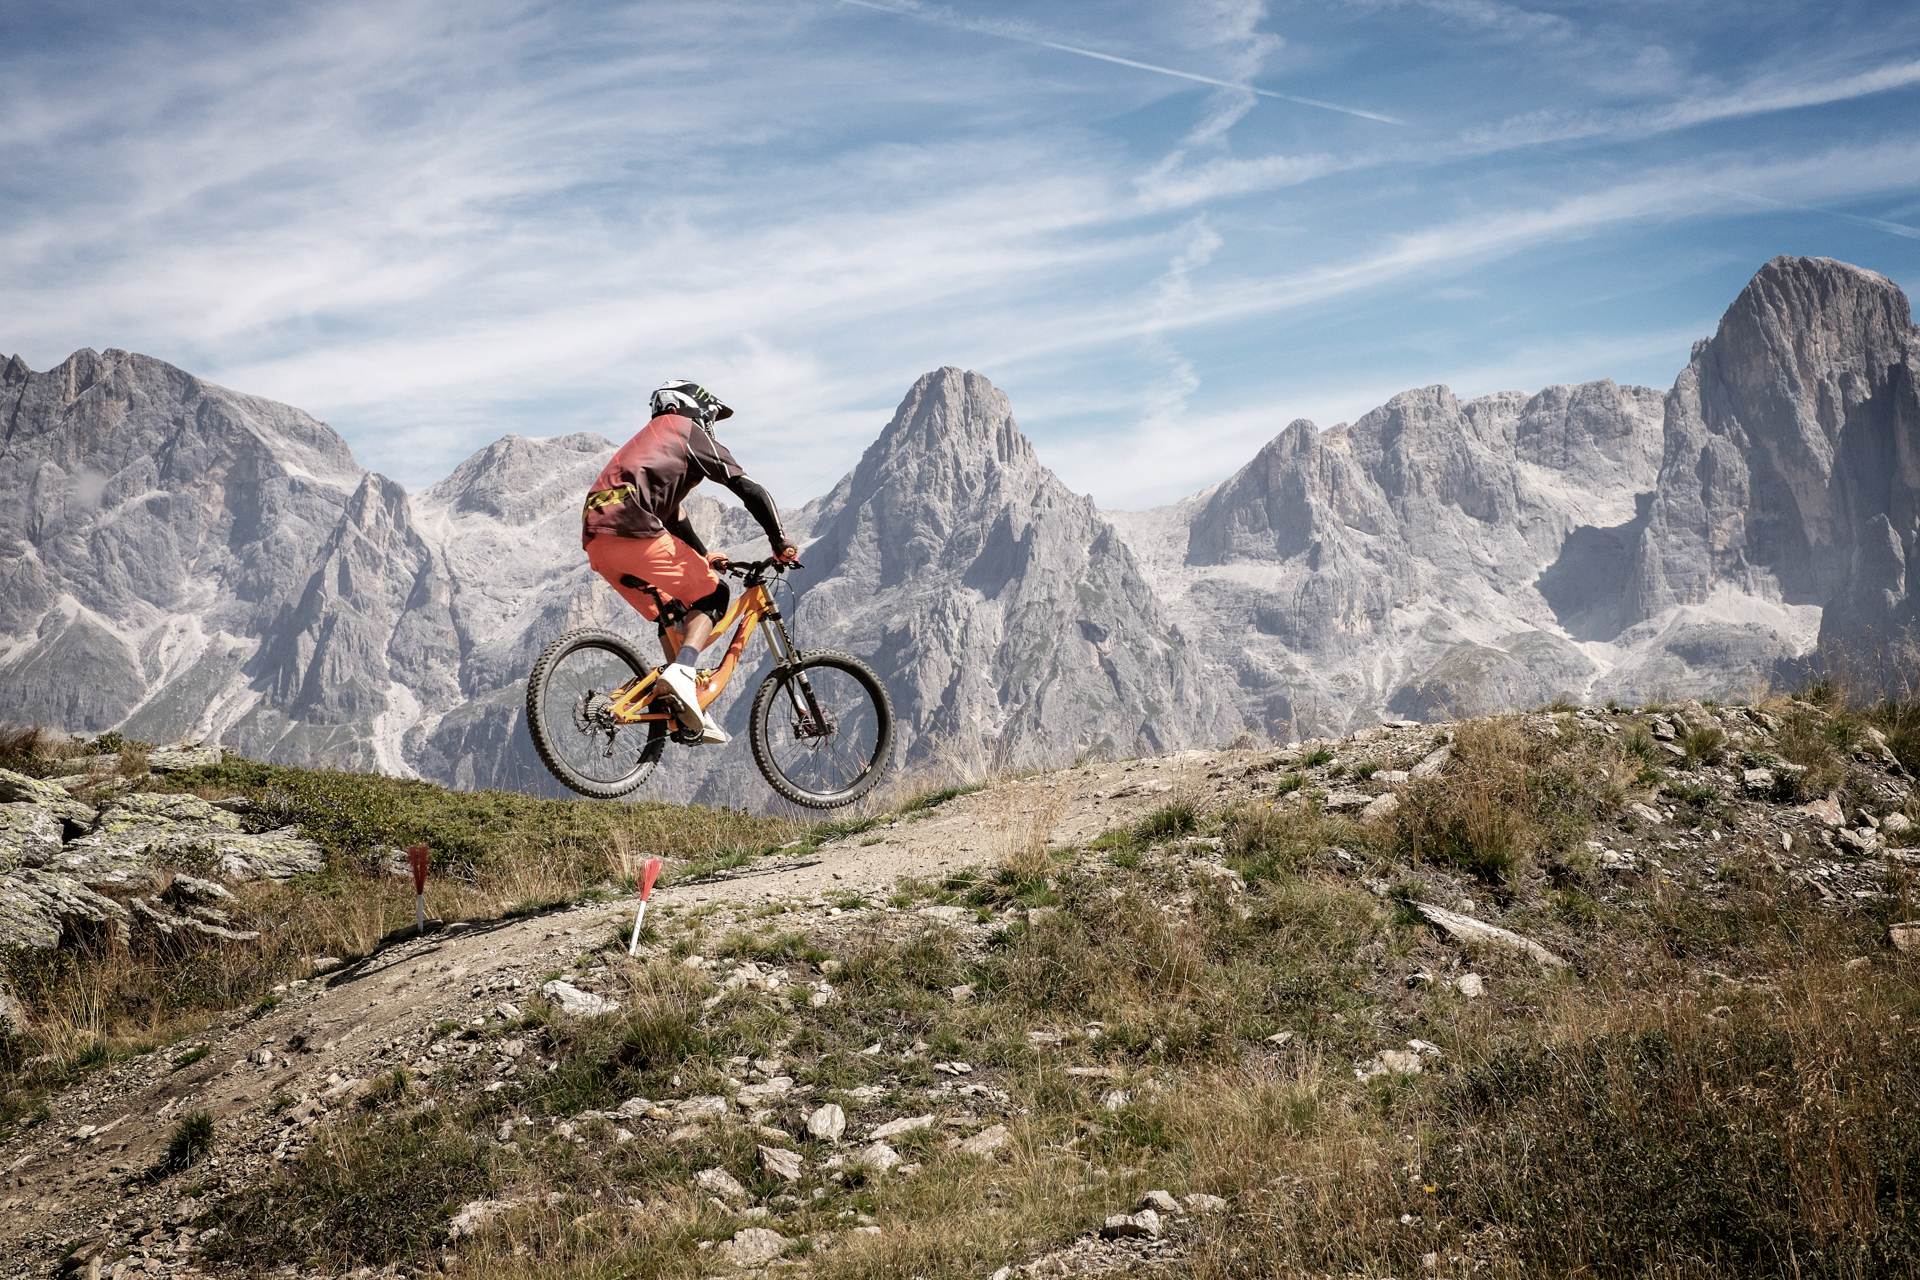 With 1,700km of trails Trentio is an absolute must for mountain bikers